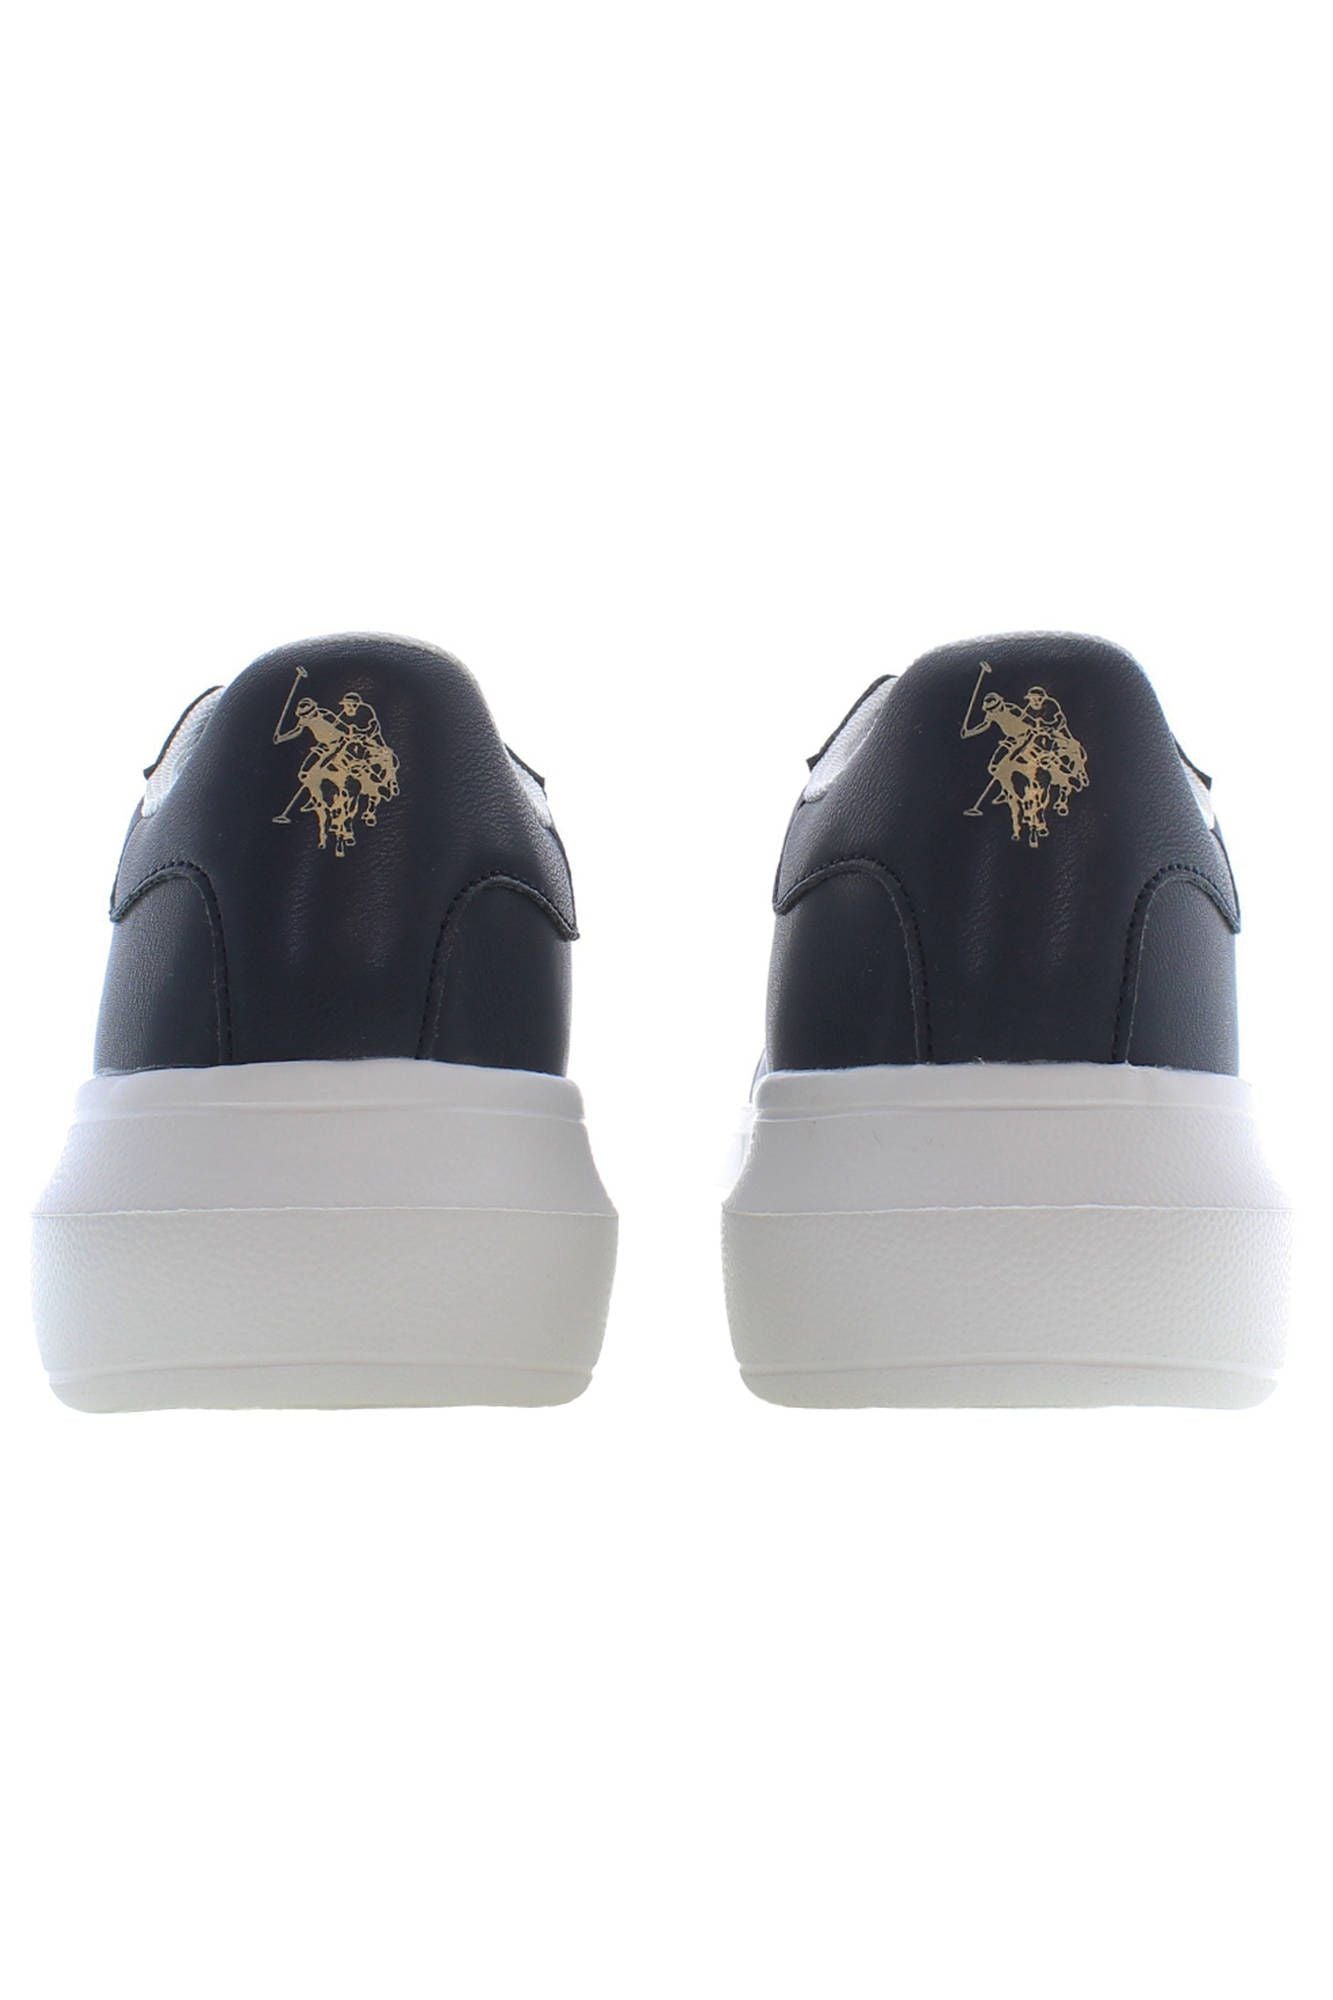 U.S. POLO ASSN. Chic Blue Lace-Up Sneakers with Logo Detail